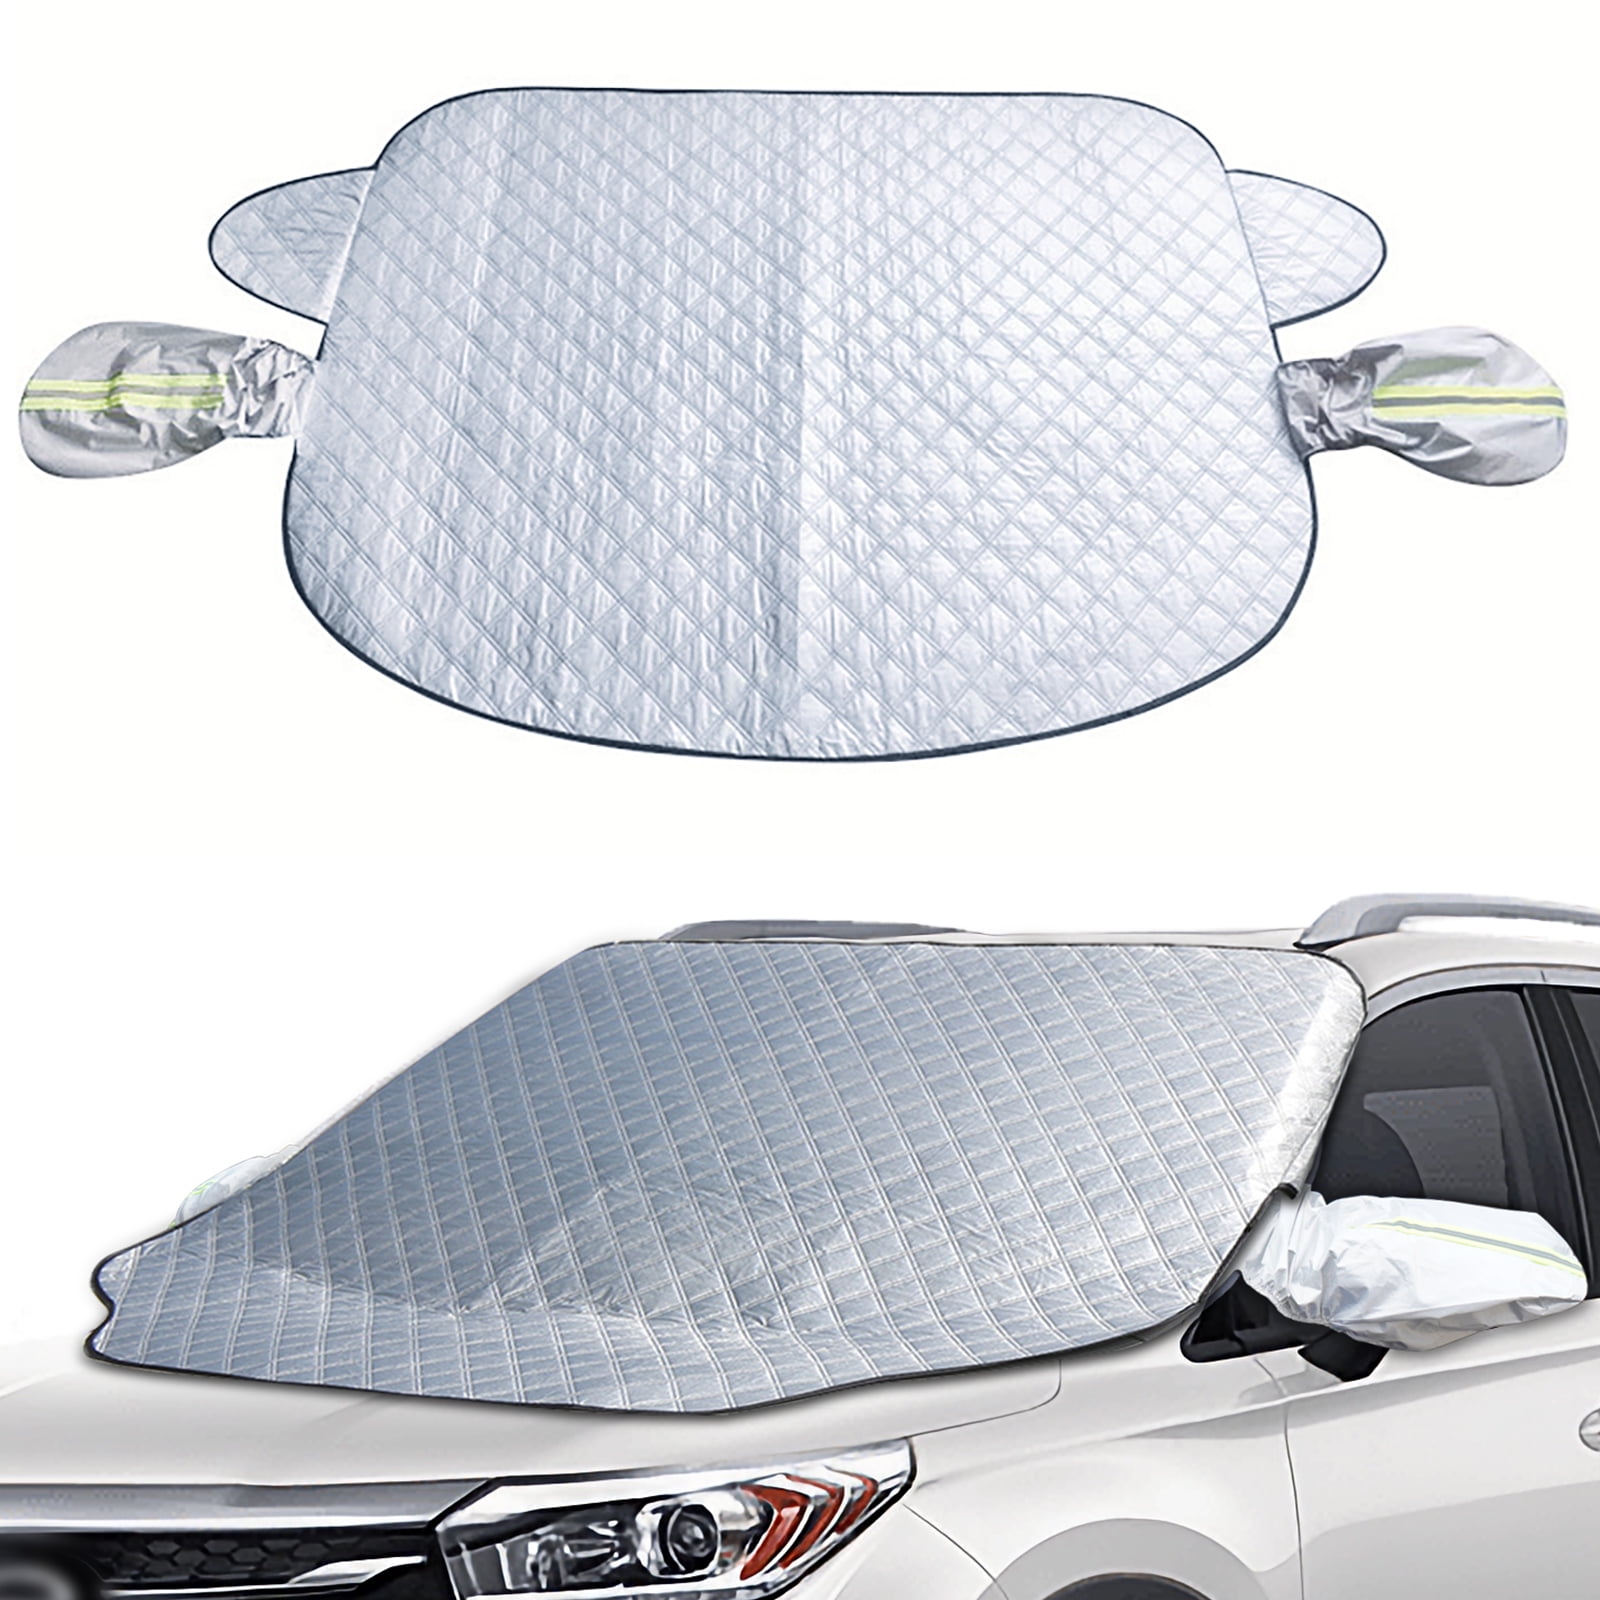 Premium Magnetic Snow Windshield Snow Cover by CAT Automotive, Fits Car Van  SUV Truck Windshield Snow Cover for Ice, Sleet & Frost Protection,  Universal Size 78 x 43 inch 